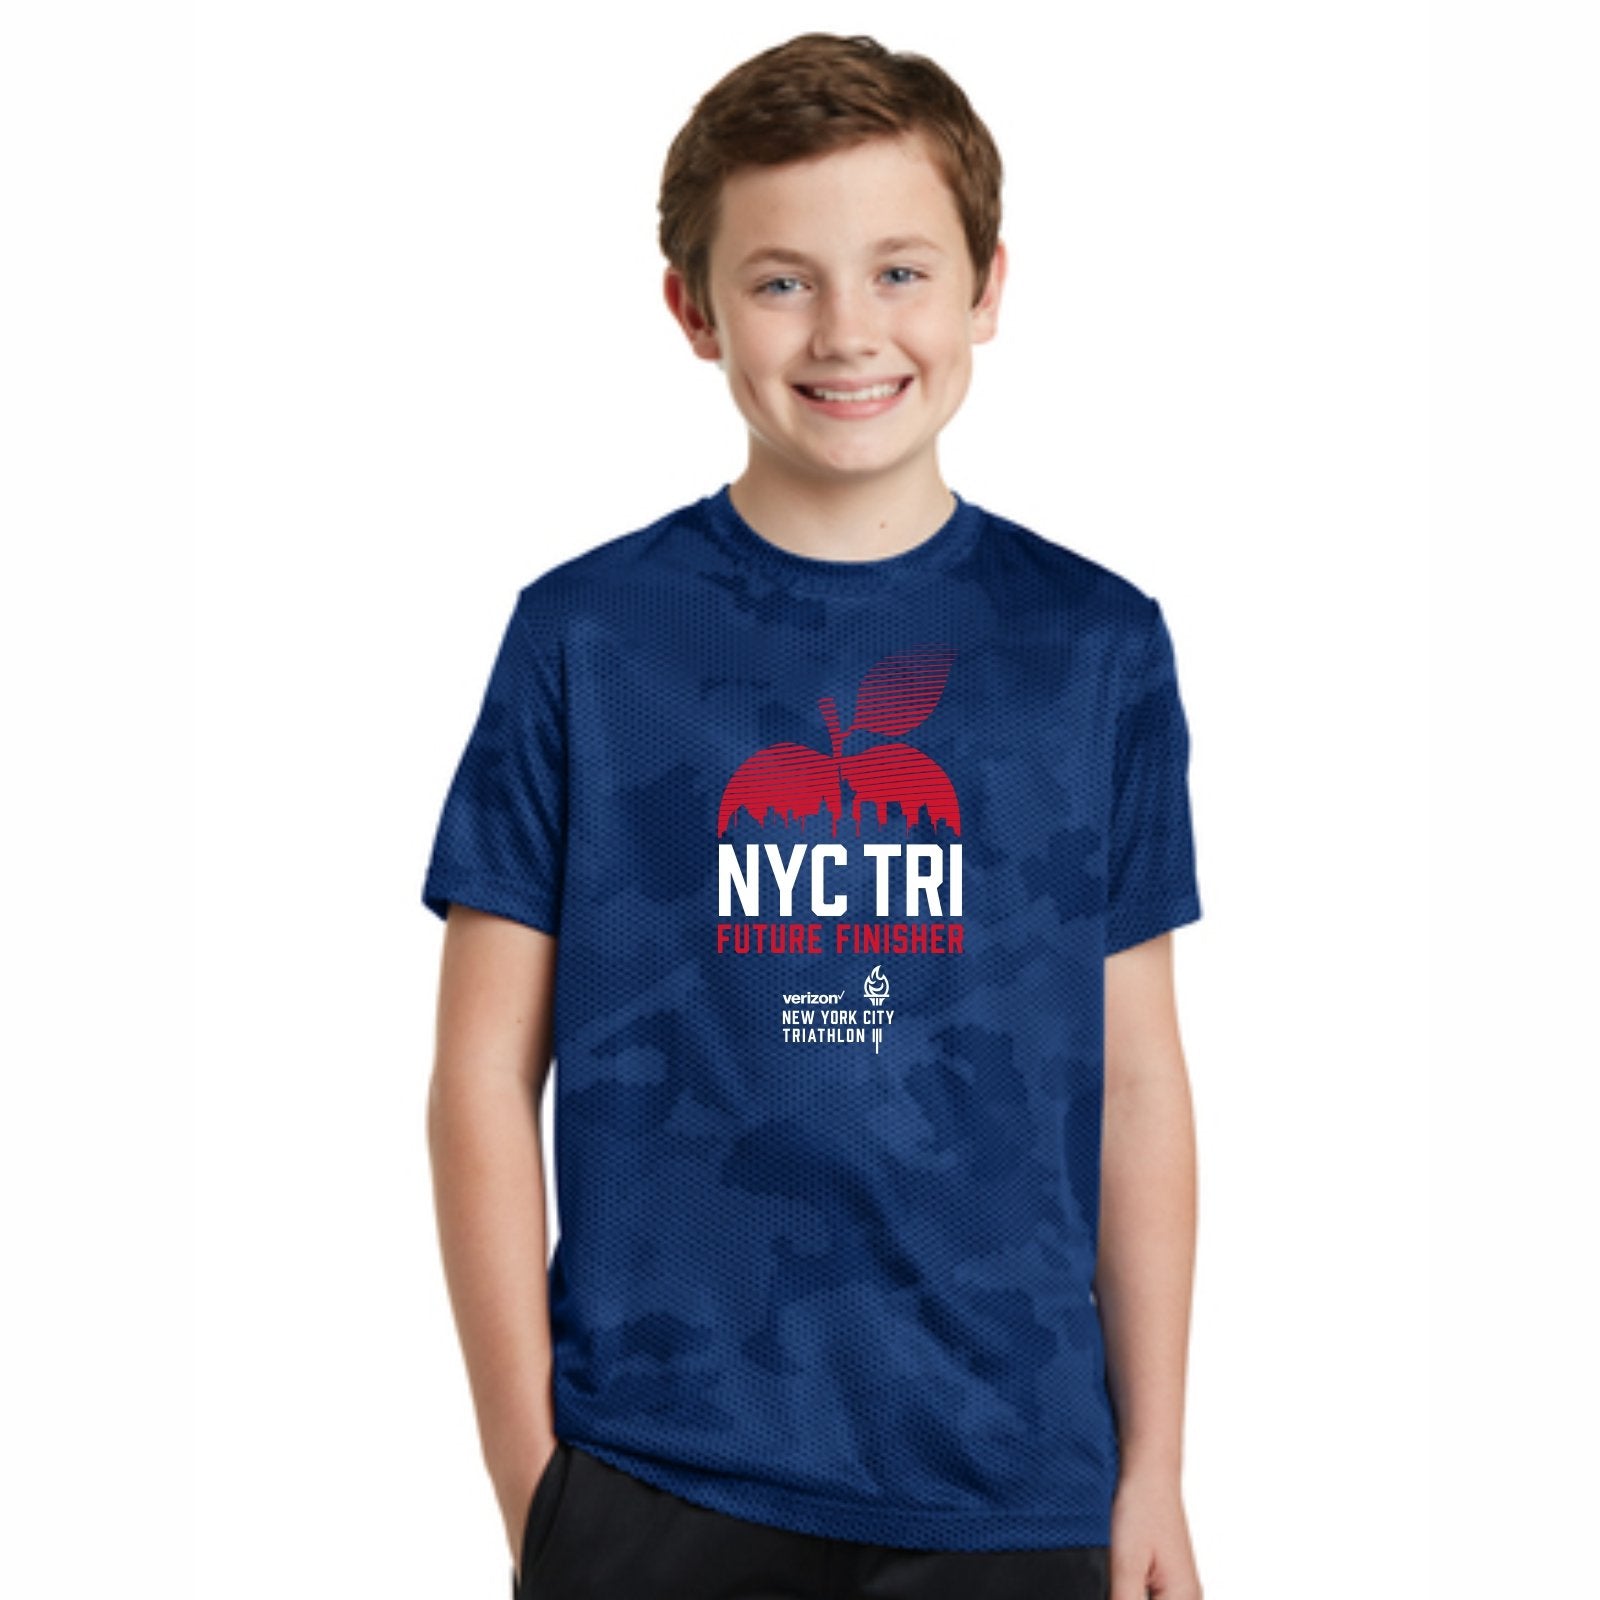 Youth SS Tech Tee -Royal Camohex- Future Finisher